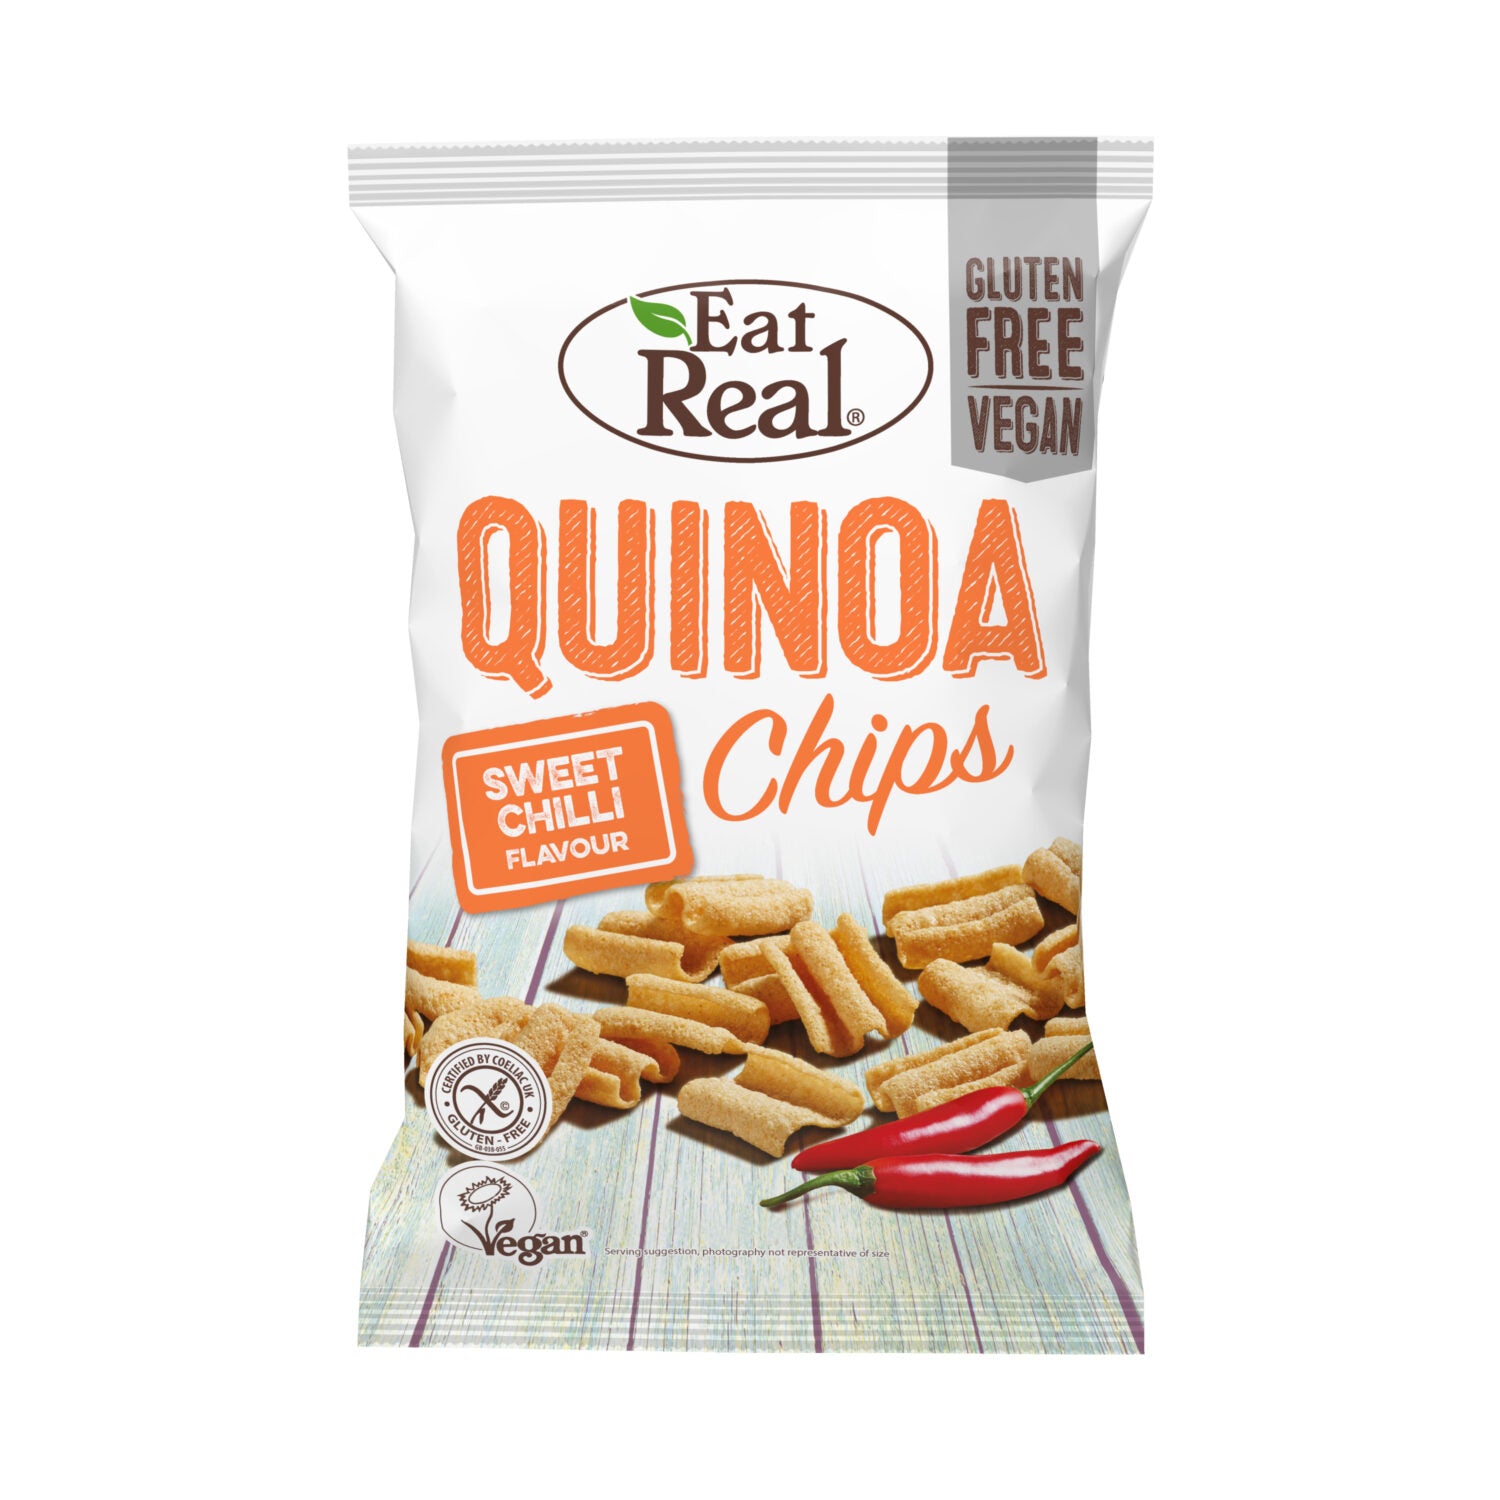 Eat Real Quinoa Chips Sweet Chili